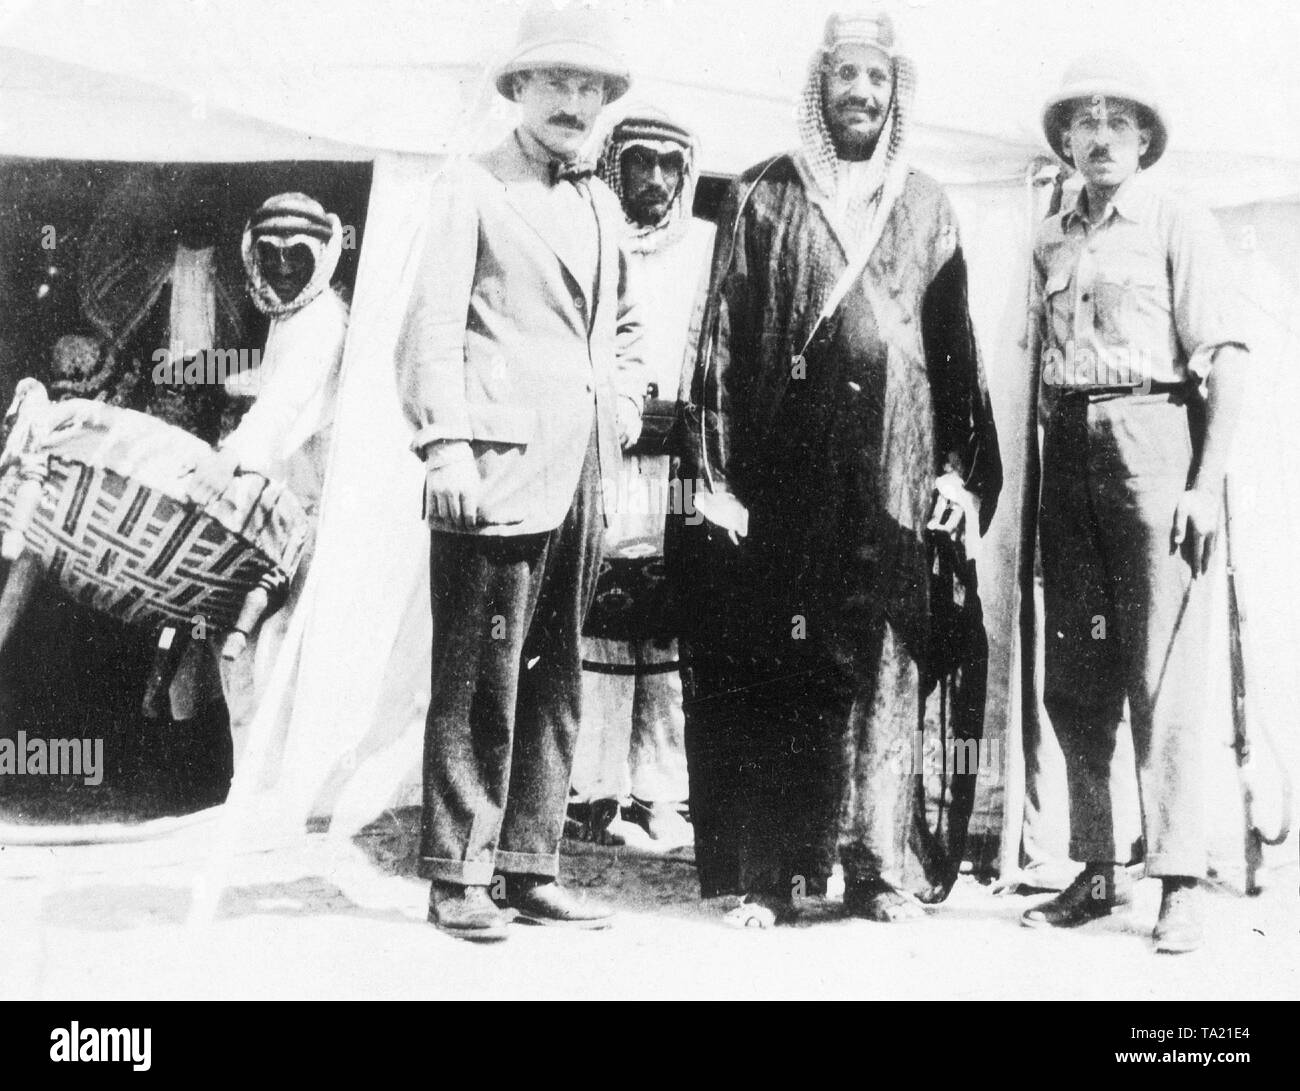 Abdul-Aziz III Ibn Saud, founder of the Wahhabis Empire and from 1932 the first King of Saudi Arabia, here in 1928 along with British oil experts who negotiated monopoly contracts for drilling concessions for their companies. He is also known under the name Abdulaziz III Ibn Saud of Saudi Arabia. Stock Photo